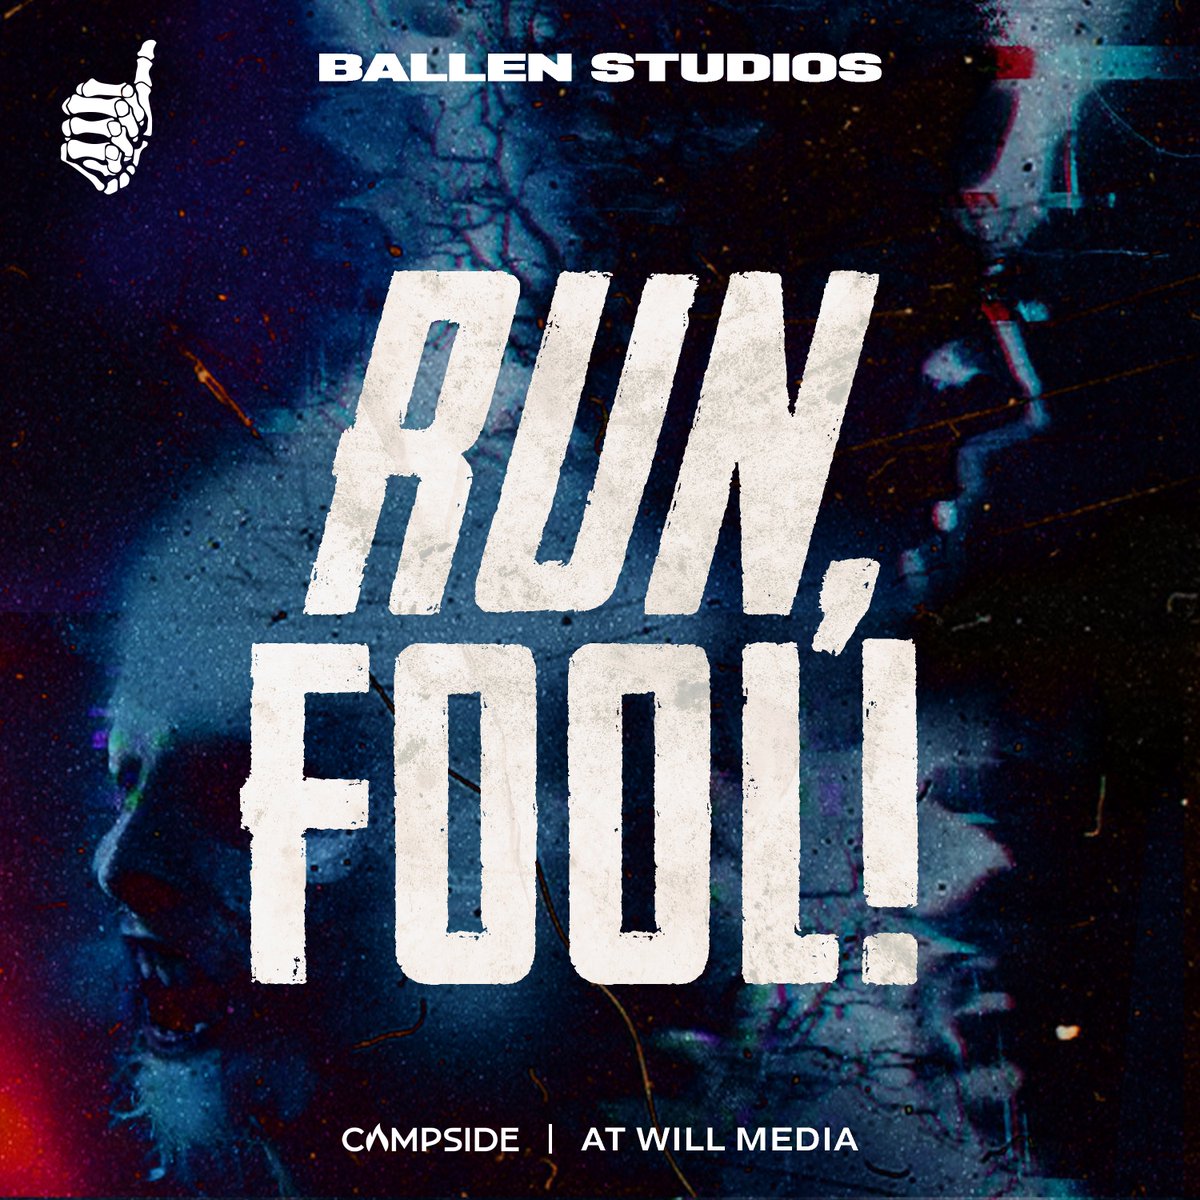 We’re excited to announce the launch of a new breed of modern ghost stories, Run, Fool! with our partners @campsidemedia and @BallenStudios! Out of the terrifying mind of @TheRodneyBarnes, Run, Fool! is a collection of harrowing tales guaranteed to make you scream. Listen now!